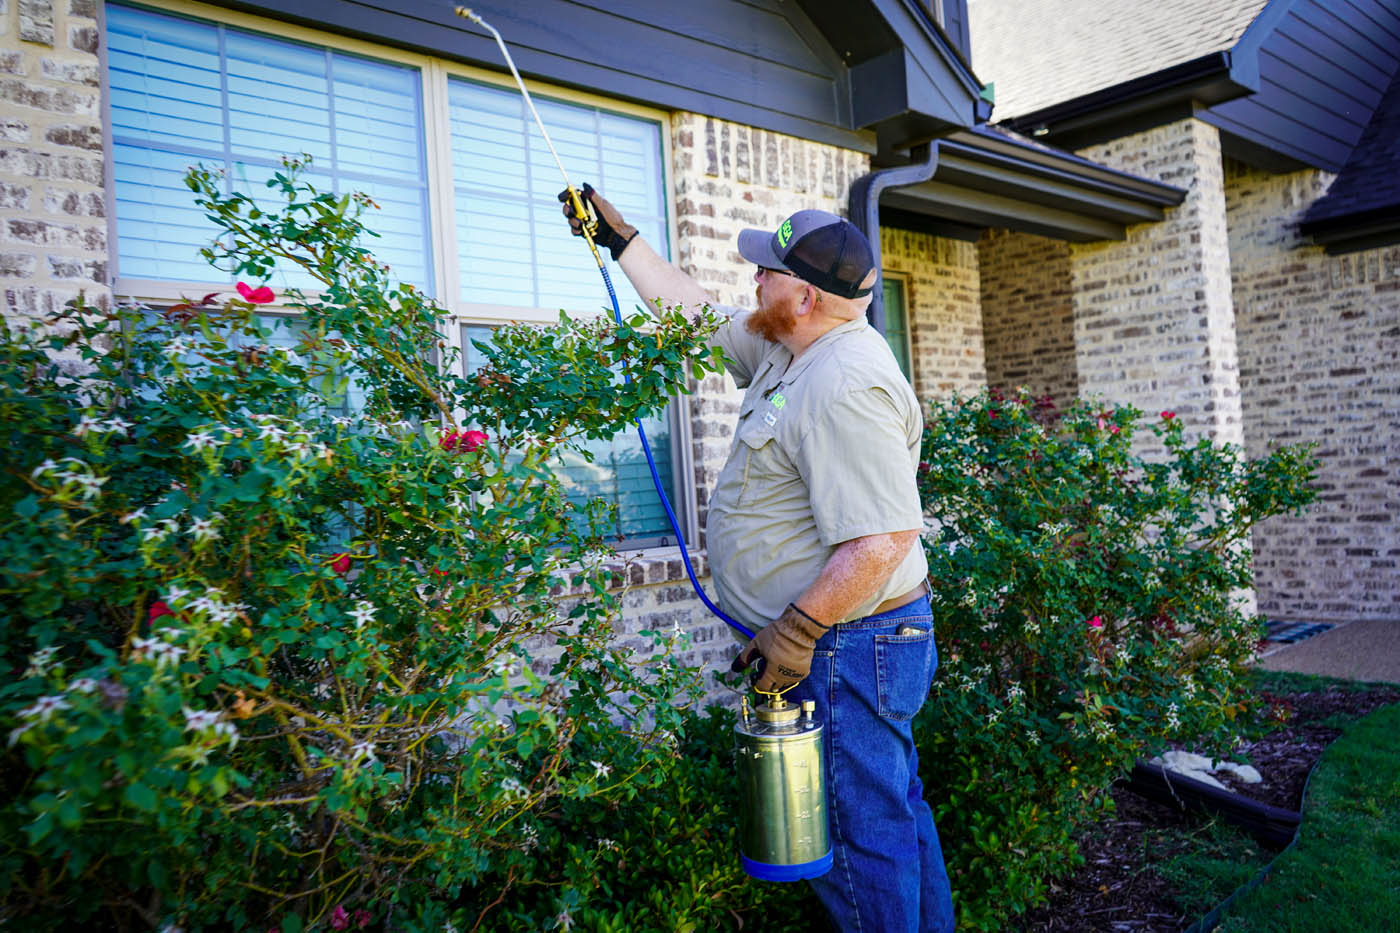 A GGA Pest Management technician spraying for residential pest control in Temple, TX.